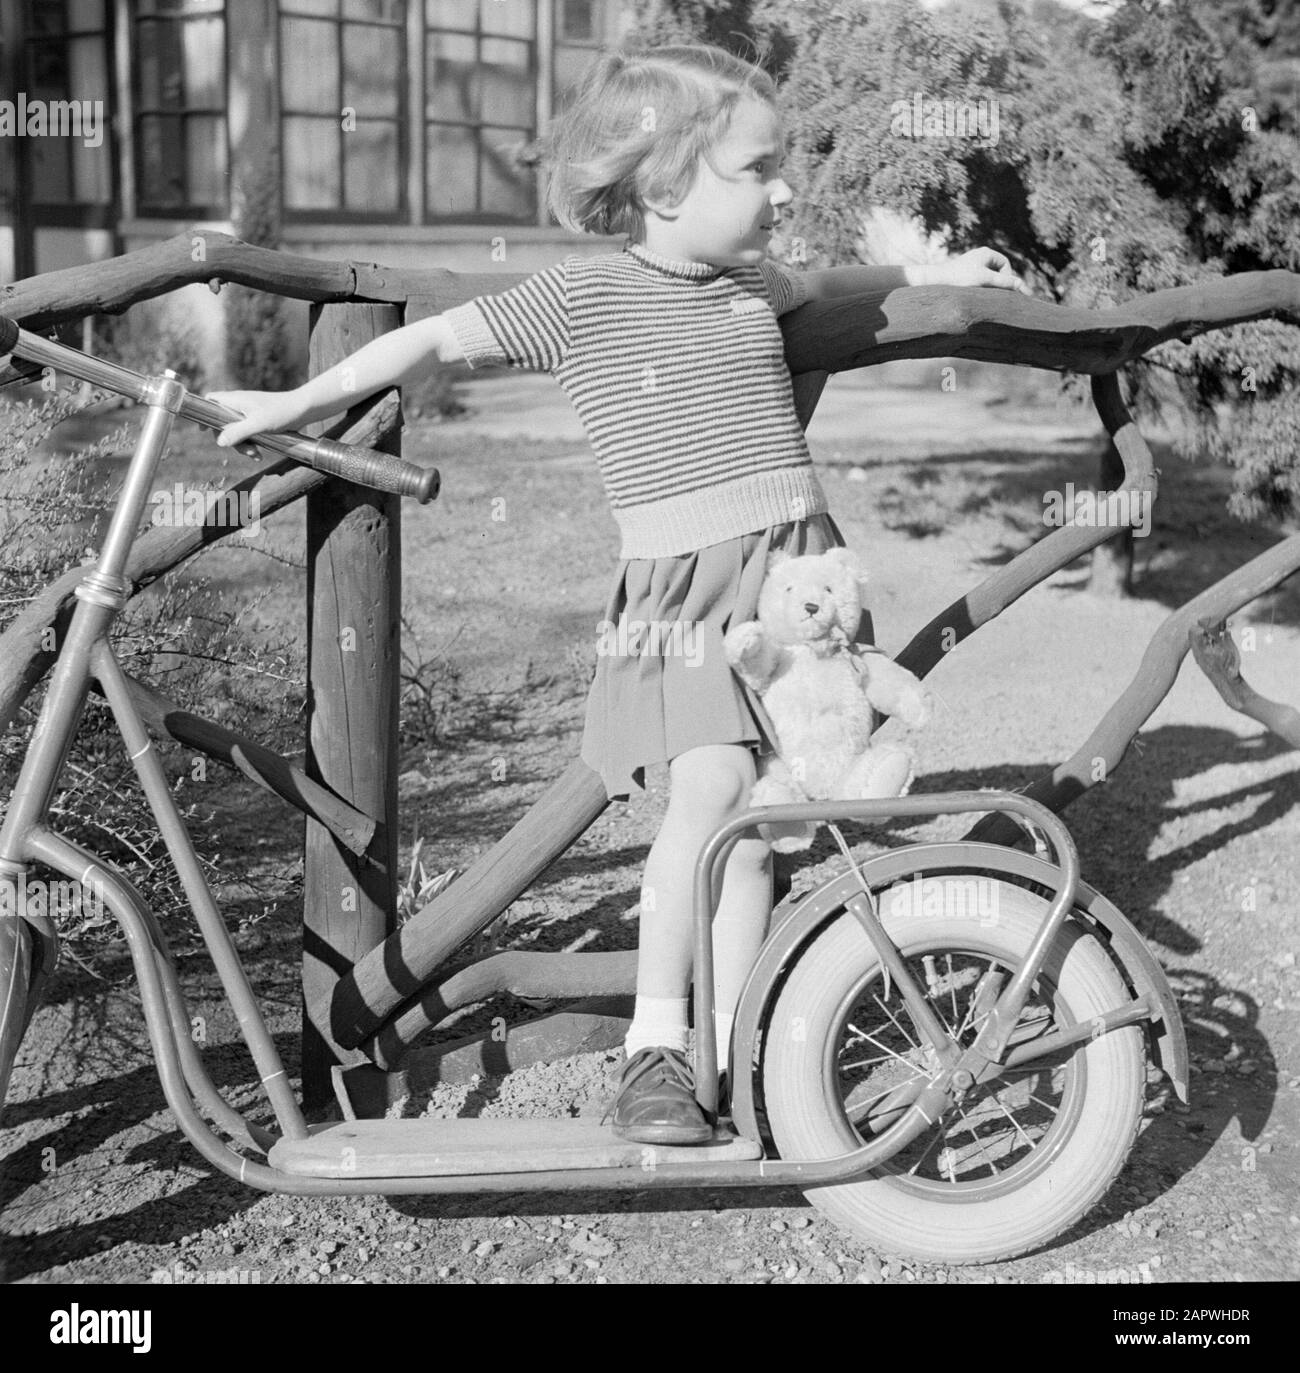 Fashion photography  Girl with autoped and teddy bear Date: 1952 Keywords: autopeds, clothing, girls Stock Photo